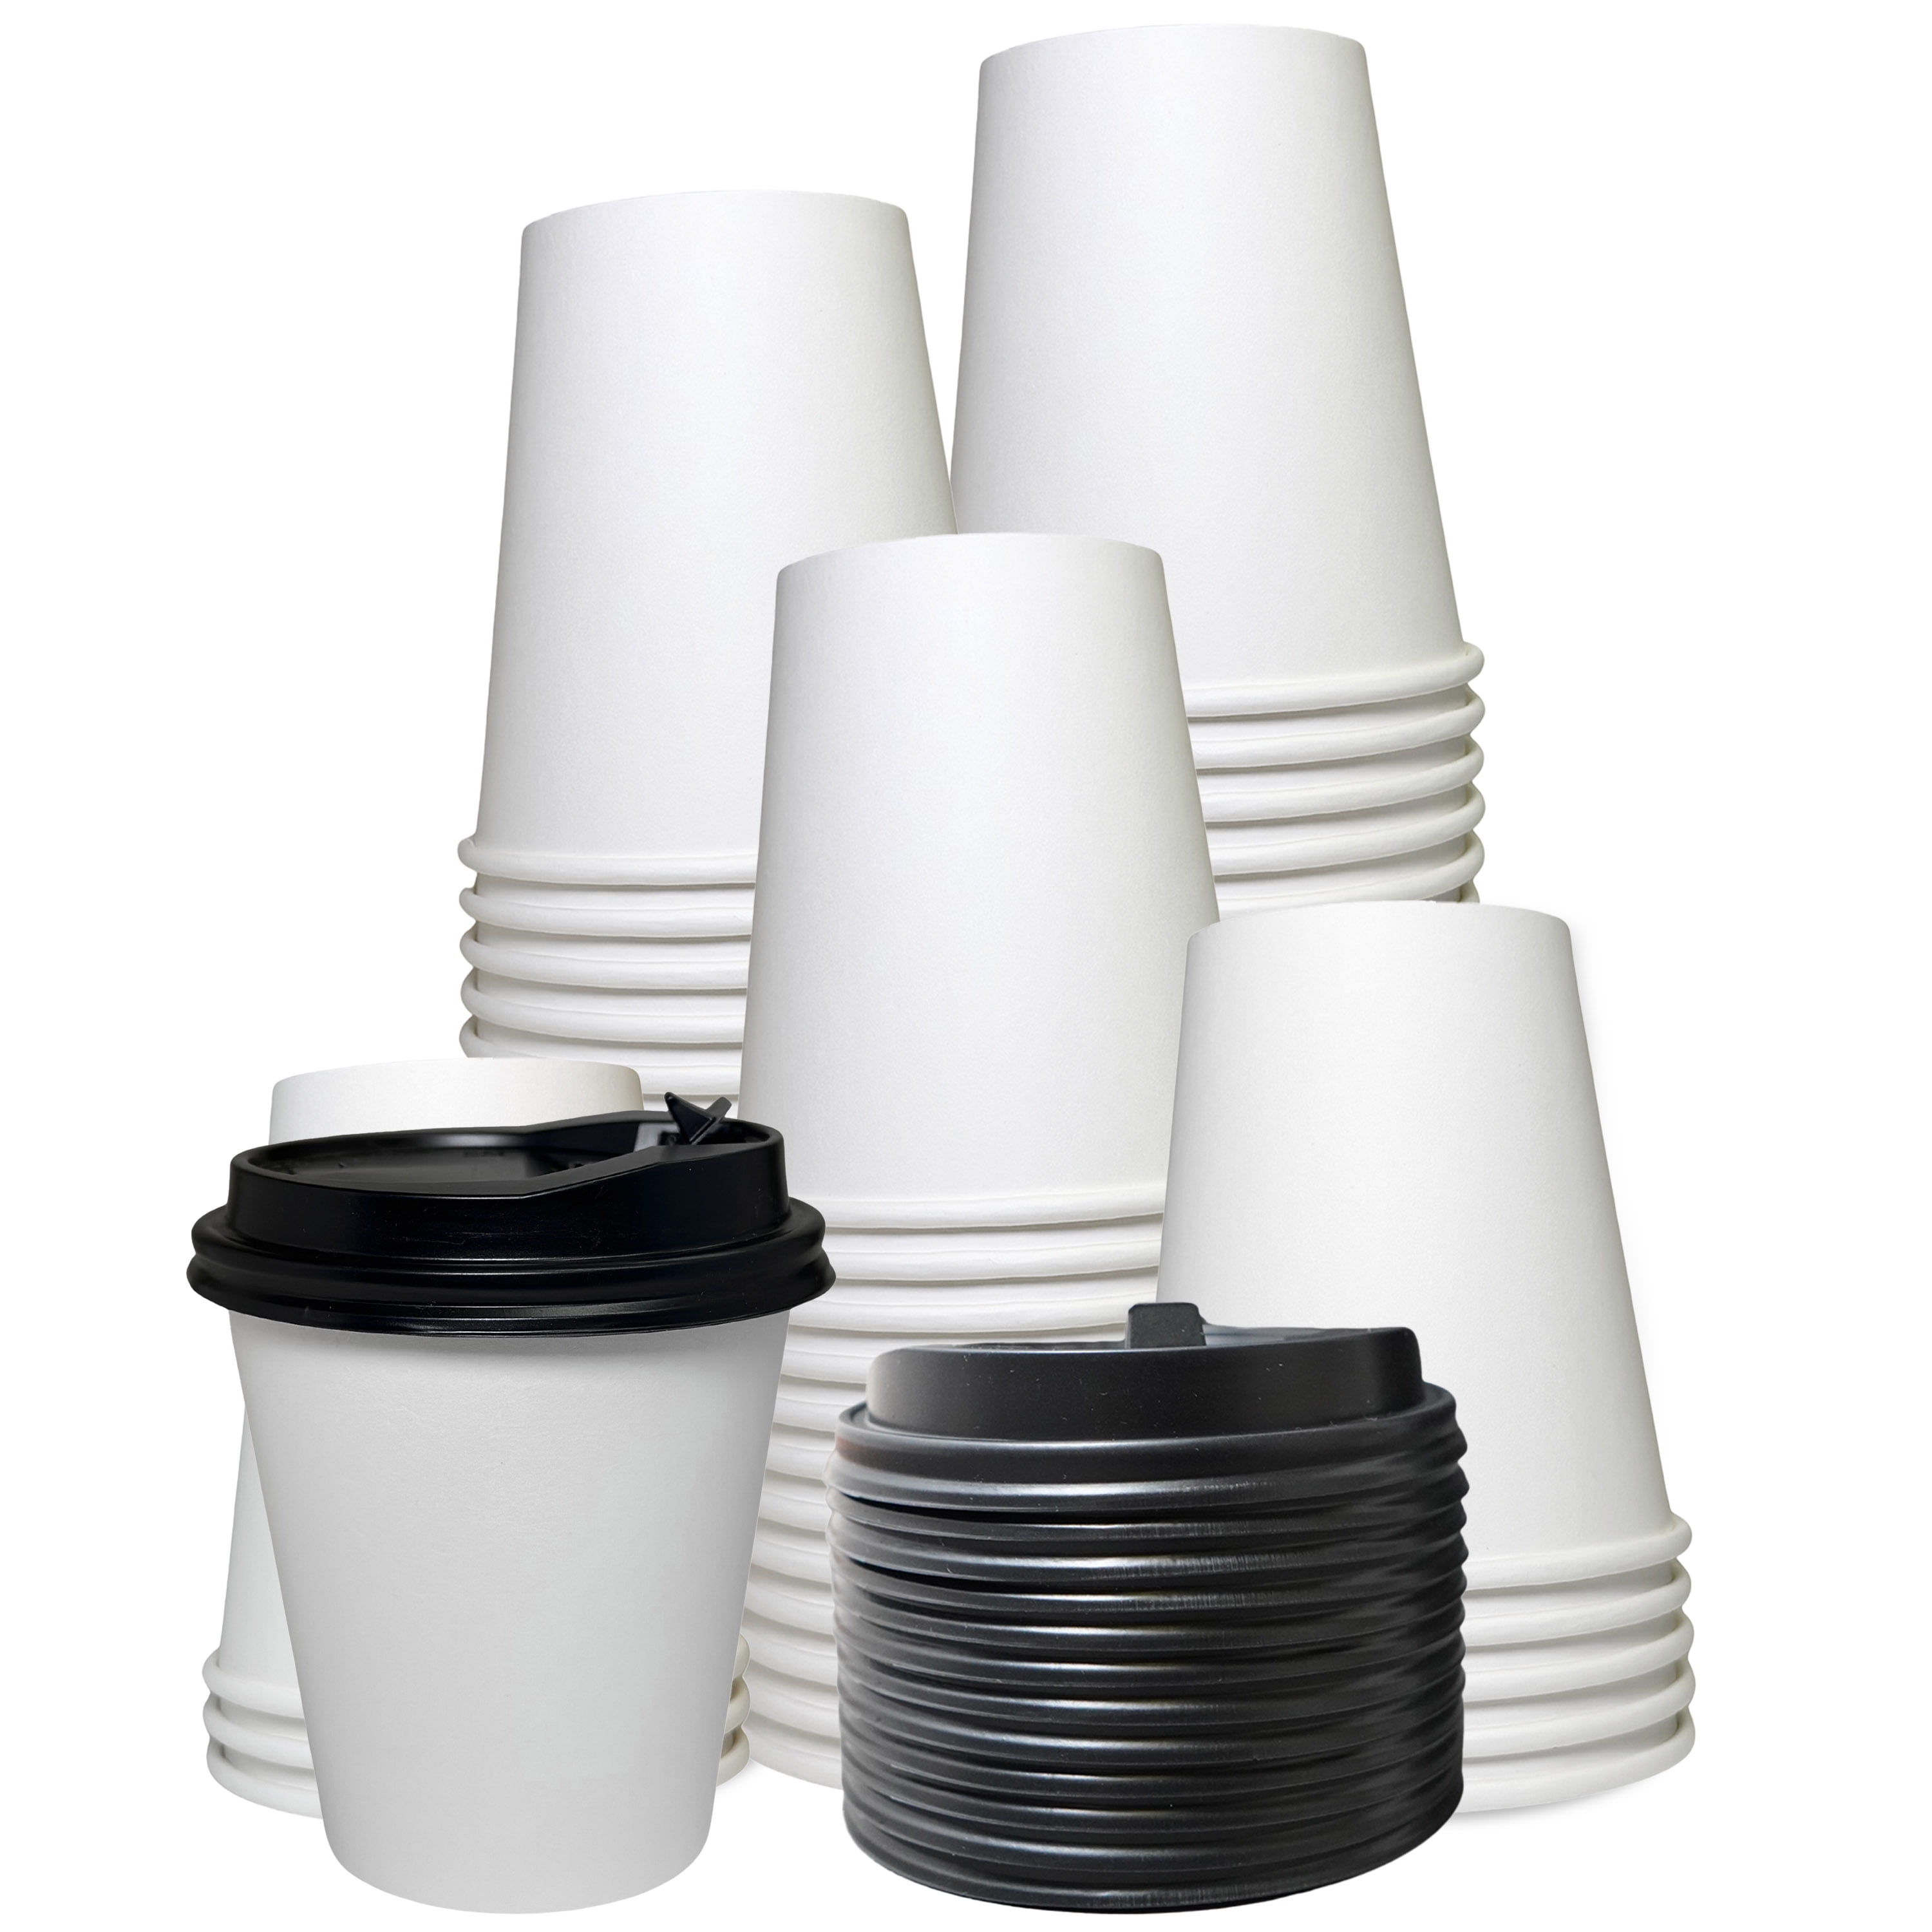 Dixie To Go Disposable Paper Cups with Lids, 12 oz, Multicolor, 60